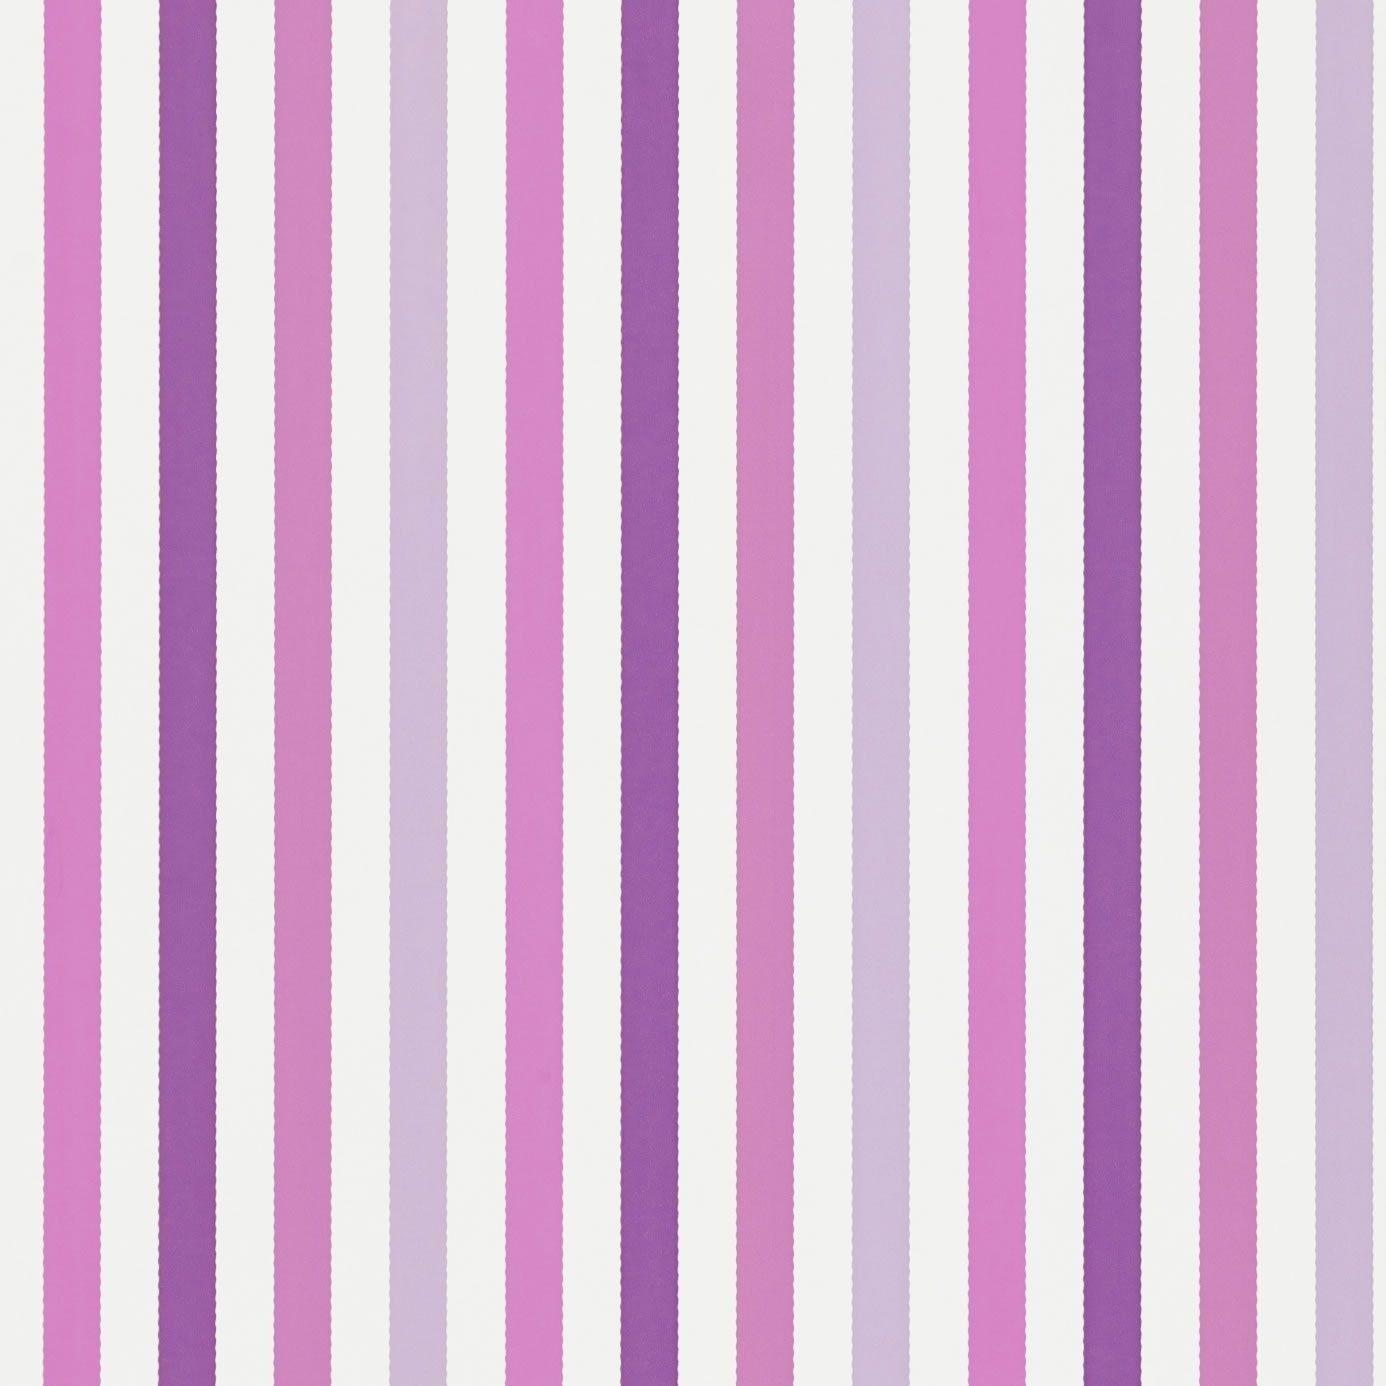 Decor Supplies. Search results for: &;pink stripe&;